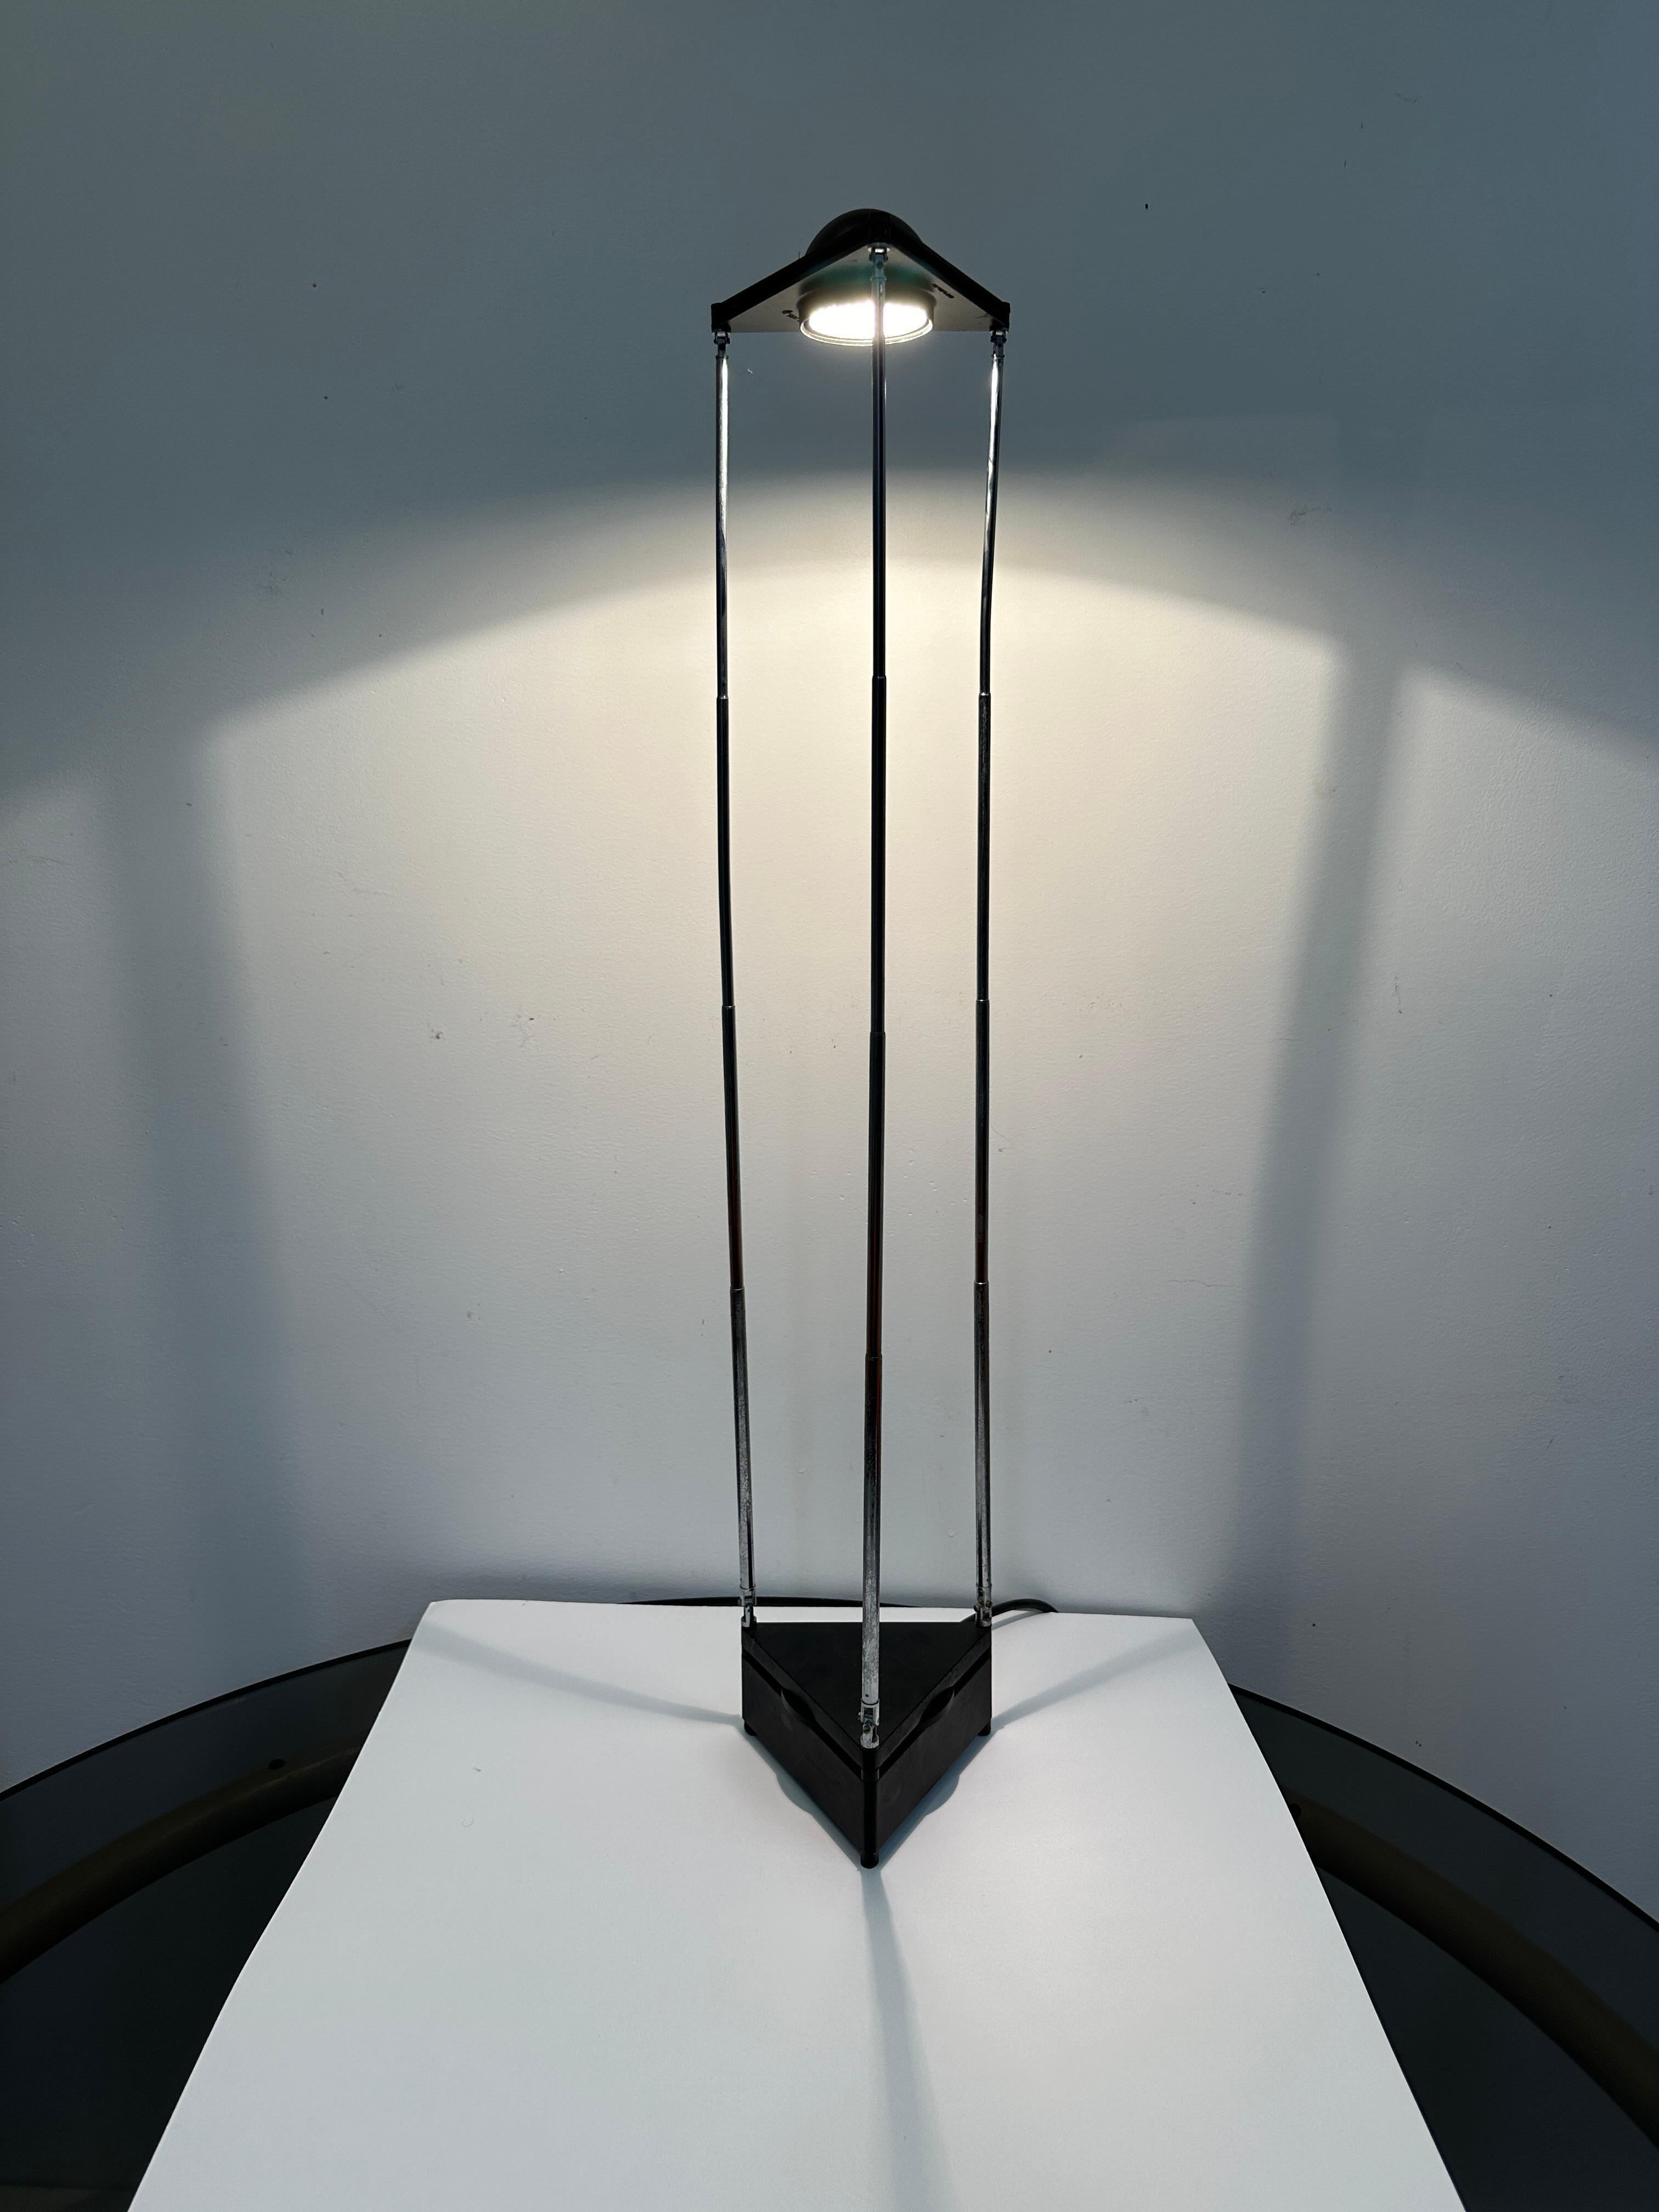 Kandido table designed by F.A. Porsche in 1983, Executed by Luci / Italy

Halogen table-lamp Kandido, black metal Stand and telescopic arms, moving in all directions. Integral power supply with integrated switch.

Signature: Kandido, design by